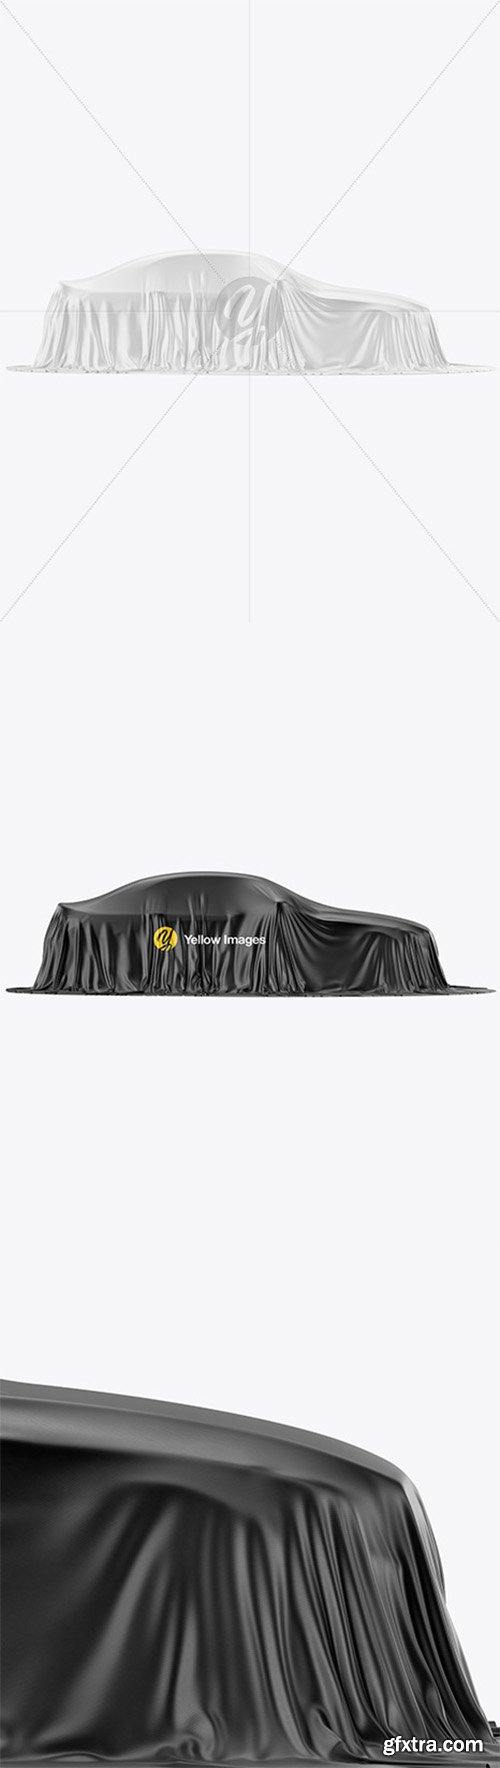 Download Car Cover Mockup Download Free And Premium Smartmockup Psd Templates And Design Assets PSD Mockup Templates